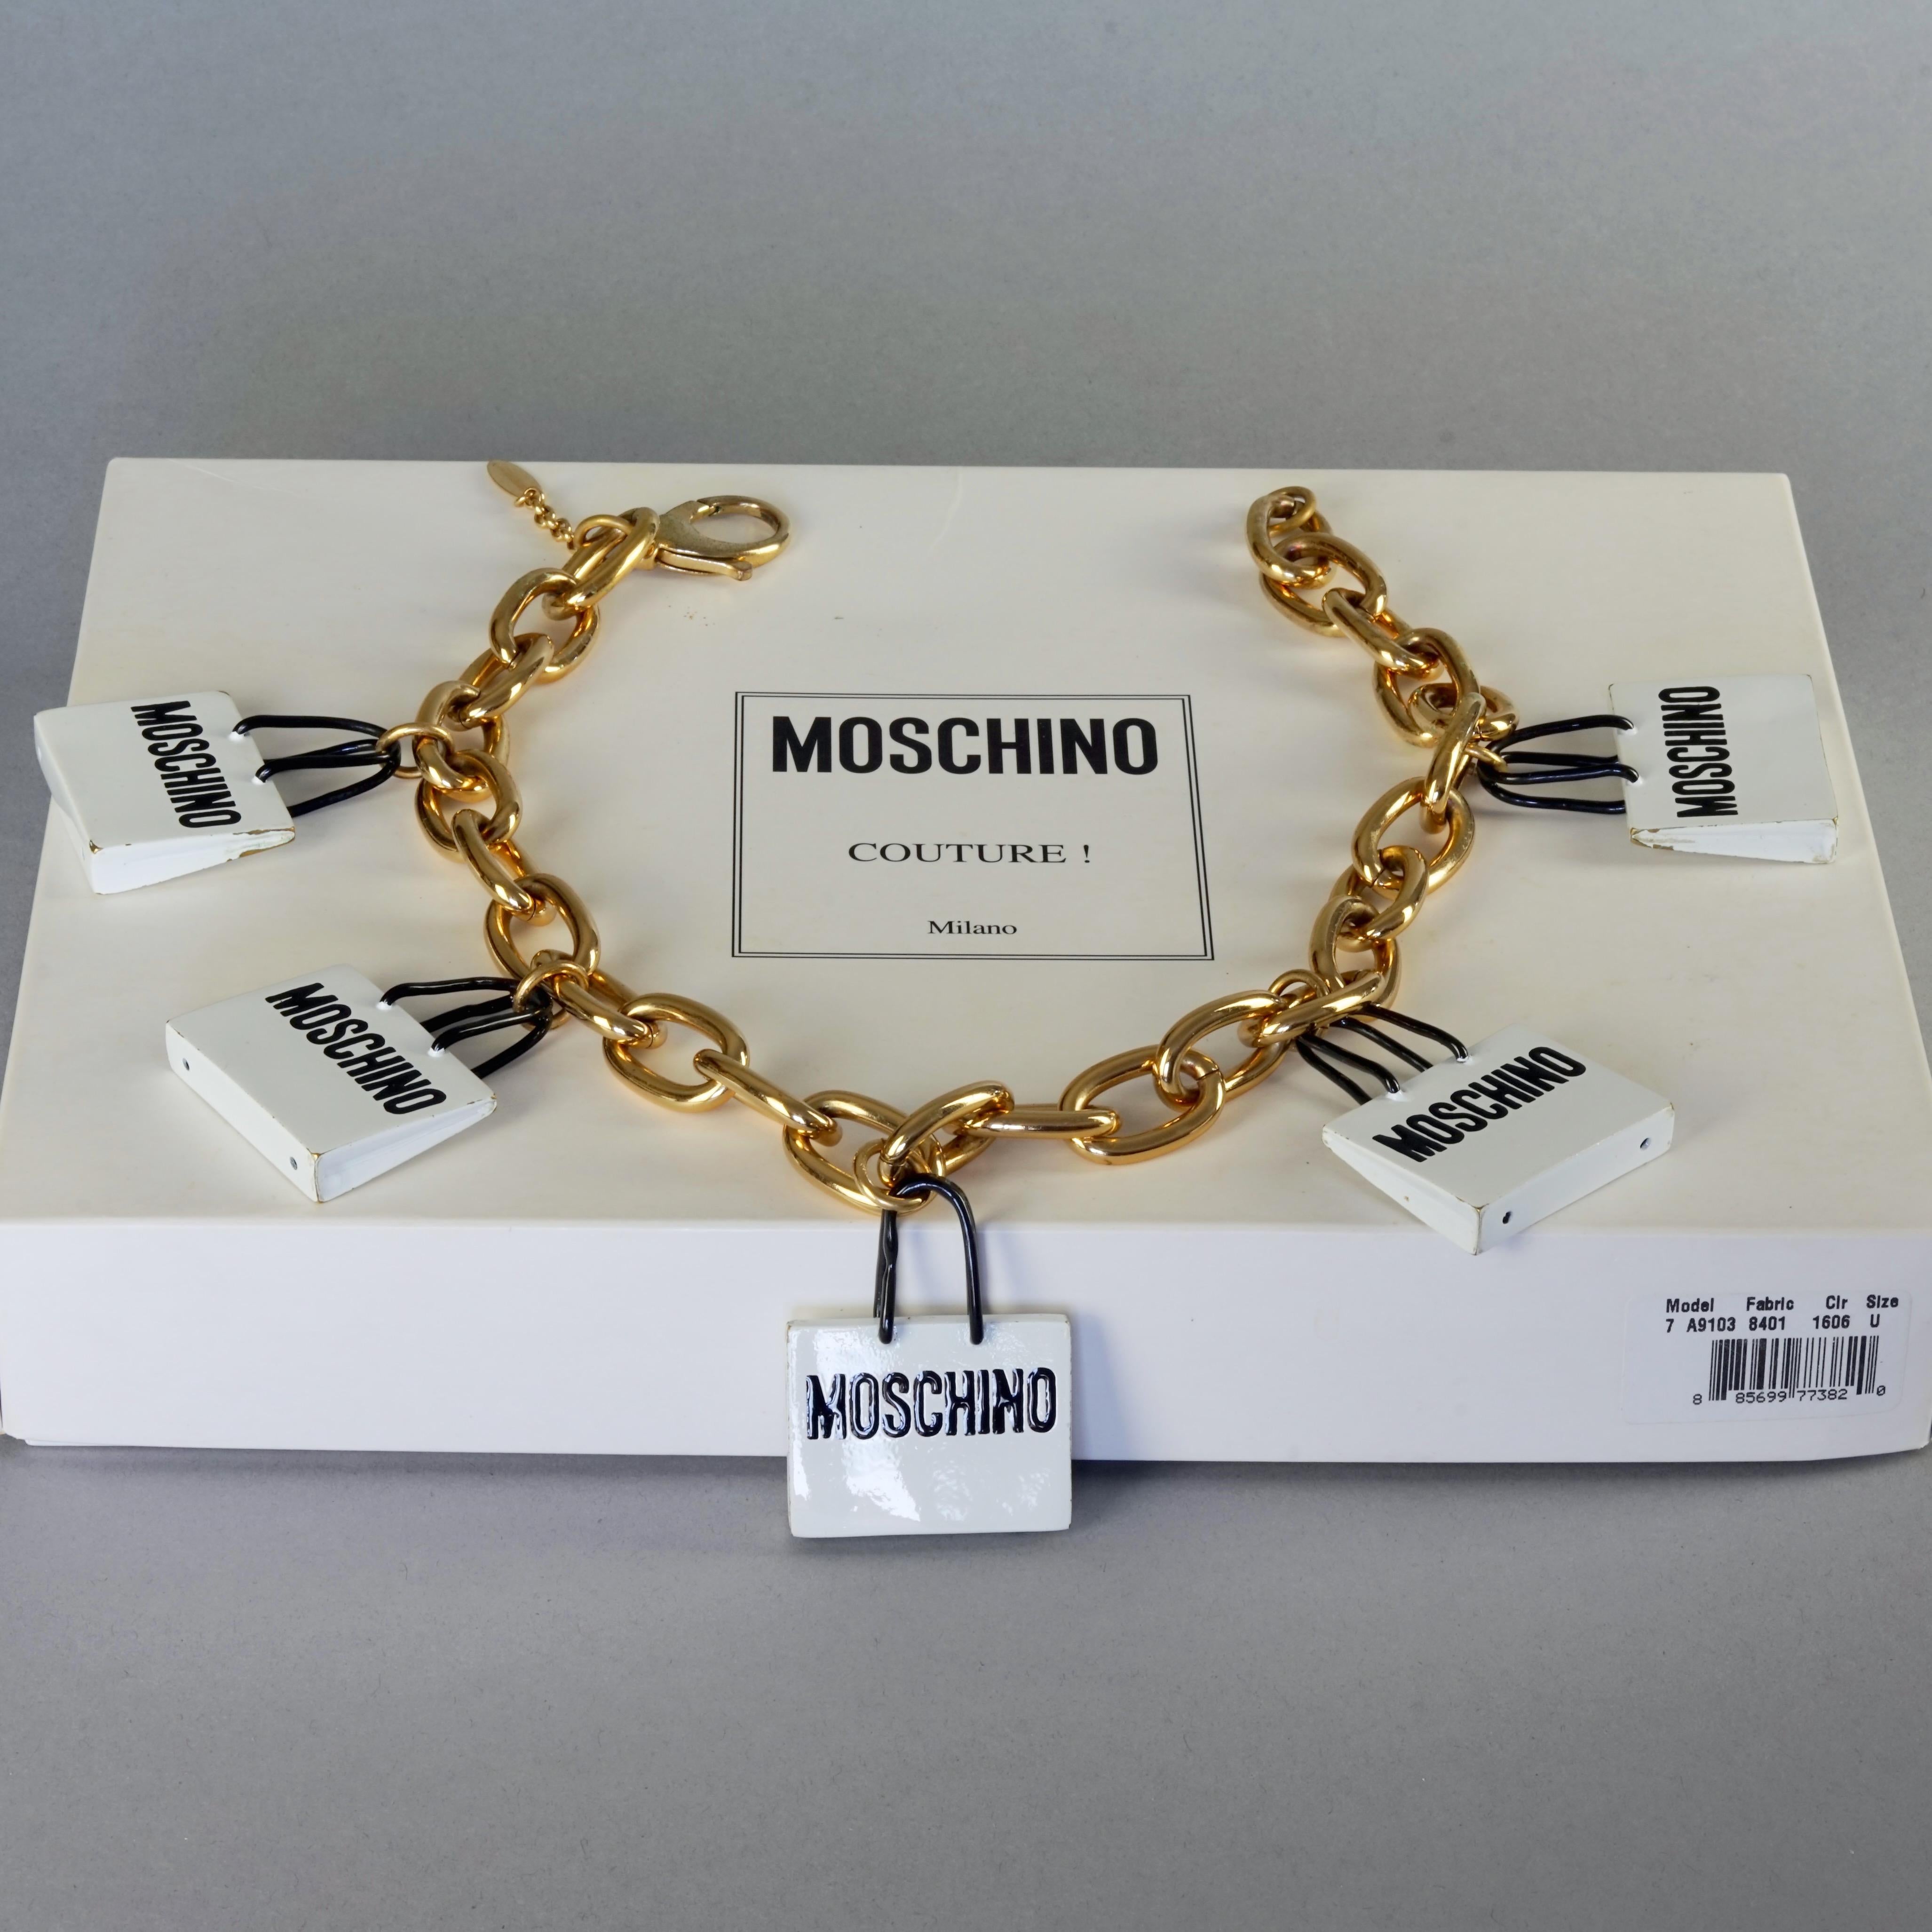 MOSCHINO Shopping Bag Charm Novelty Necklace Resort 2016 Runway In Good Condition For Sale In Kingersheim, Alsace